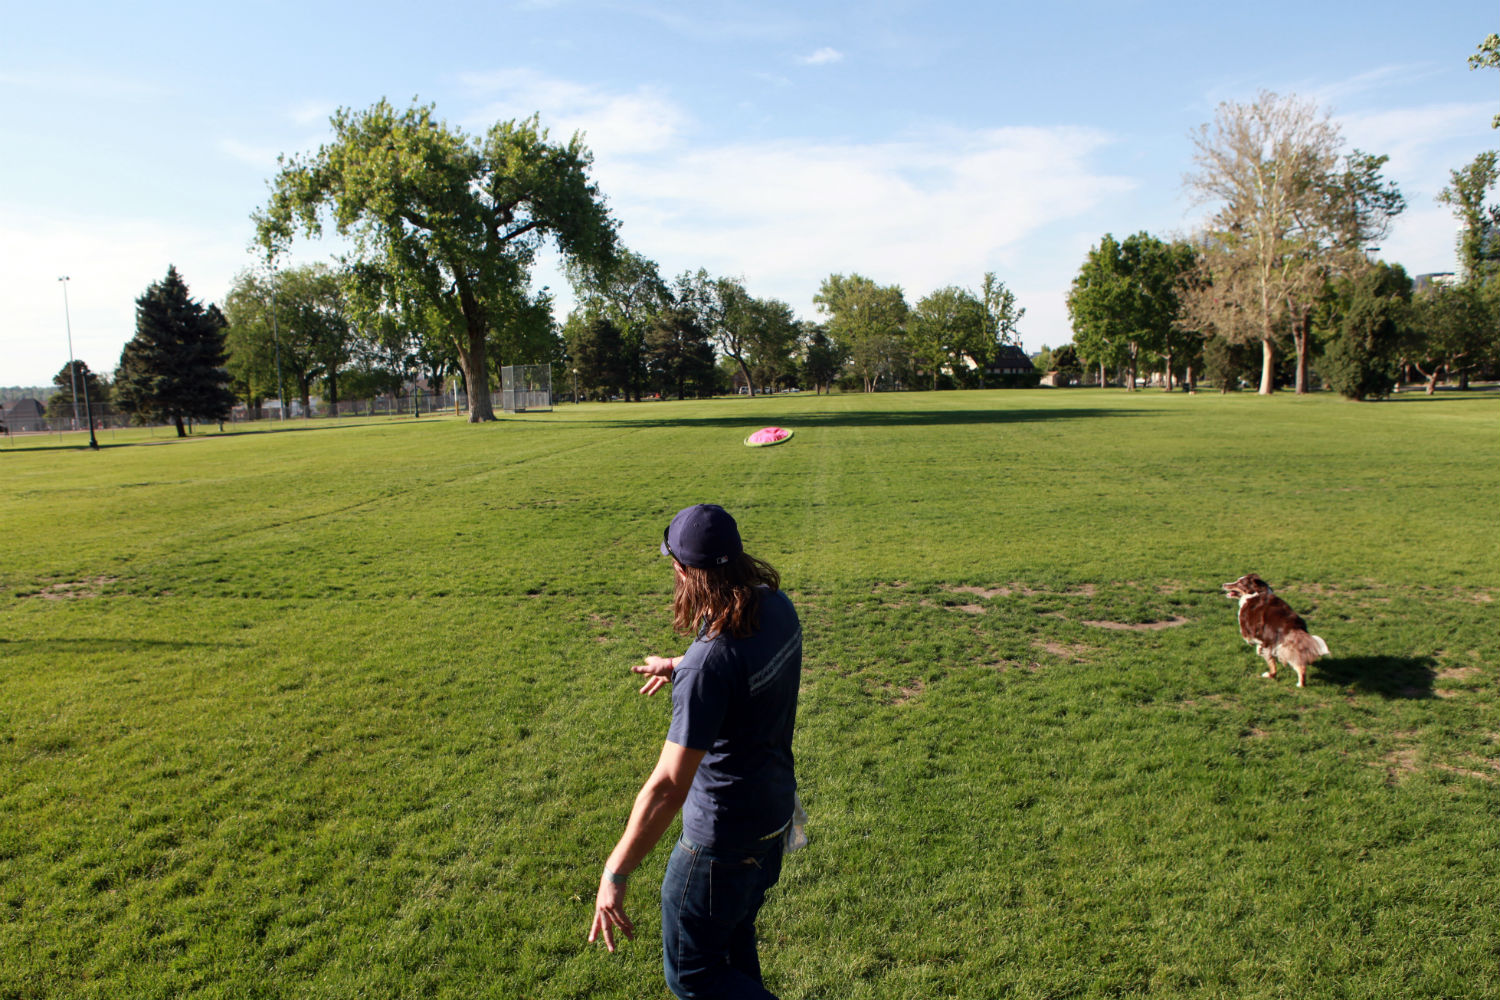 On marijuana-infused tincture and just letting loose in the park with the Frisbee. (Lindsay Pierce, The Denver Post)